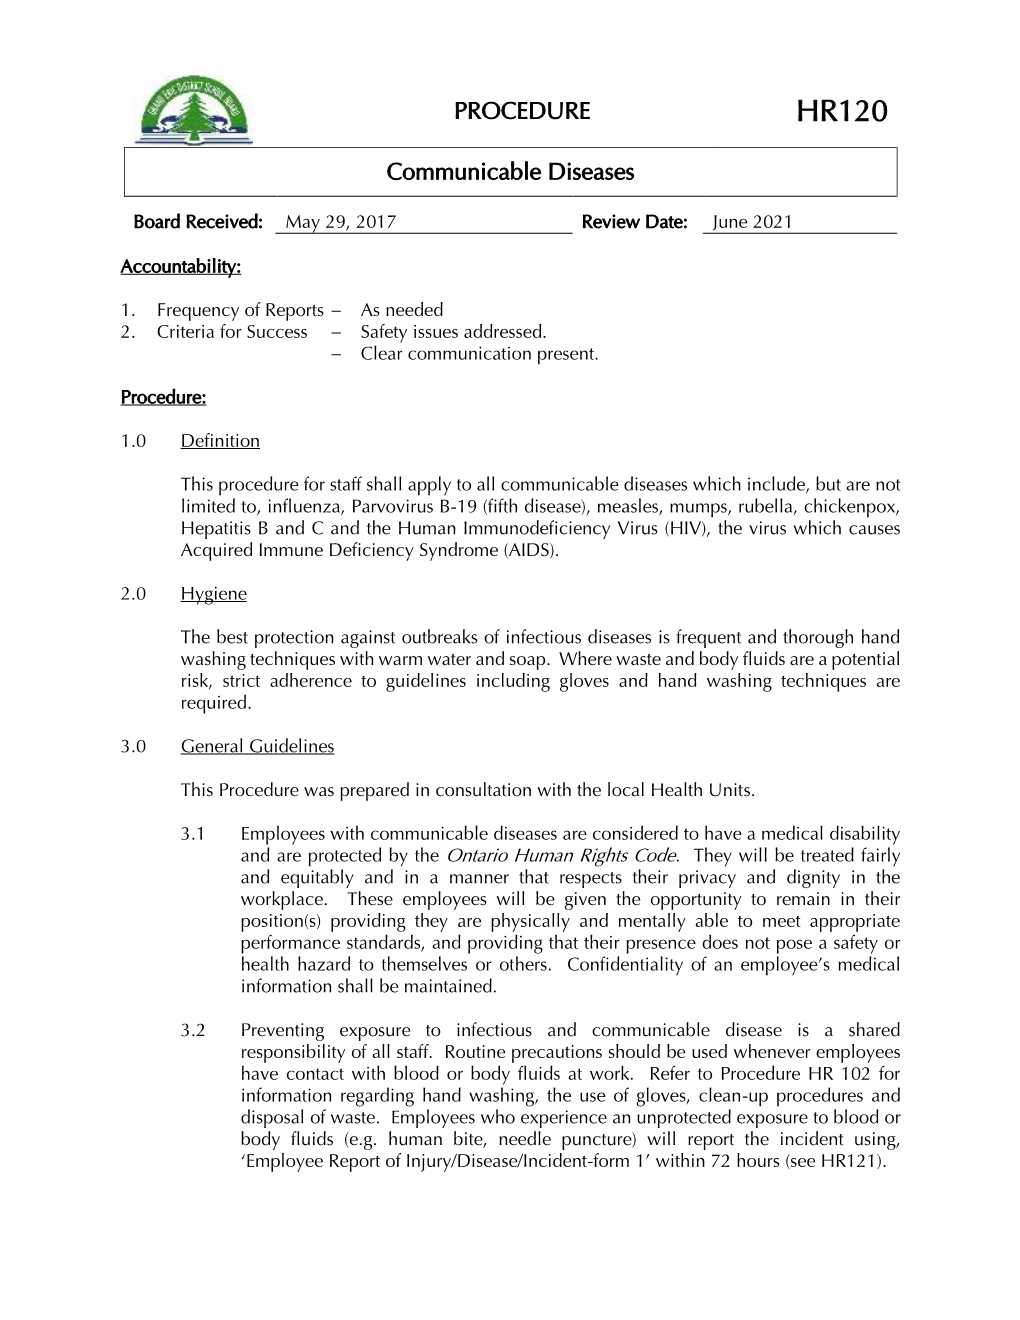 HR120 – Communicable Diseases Page 2 4.0 Communicable Diseases